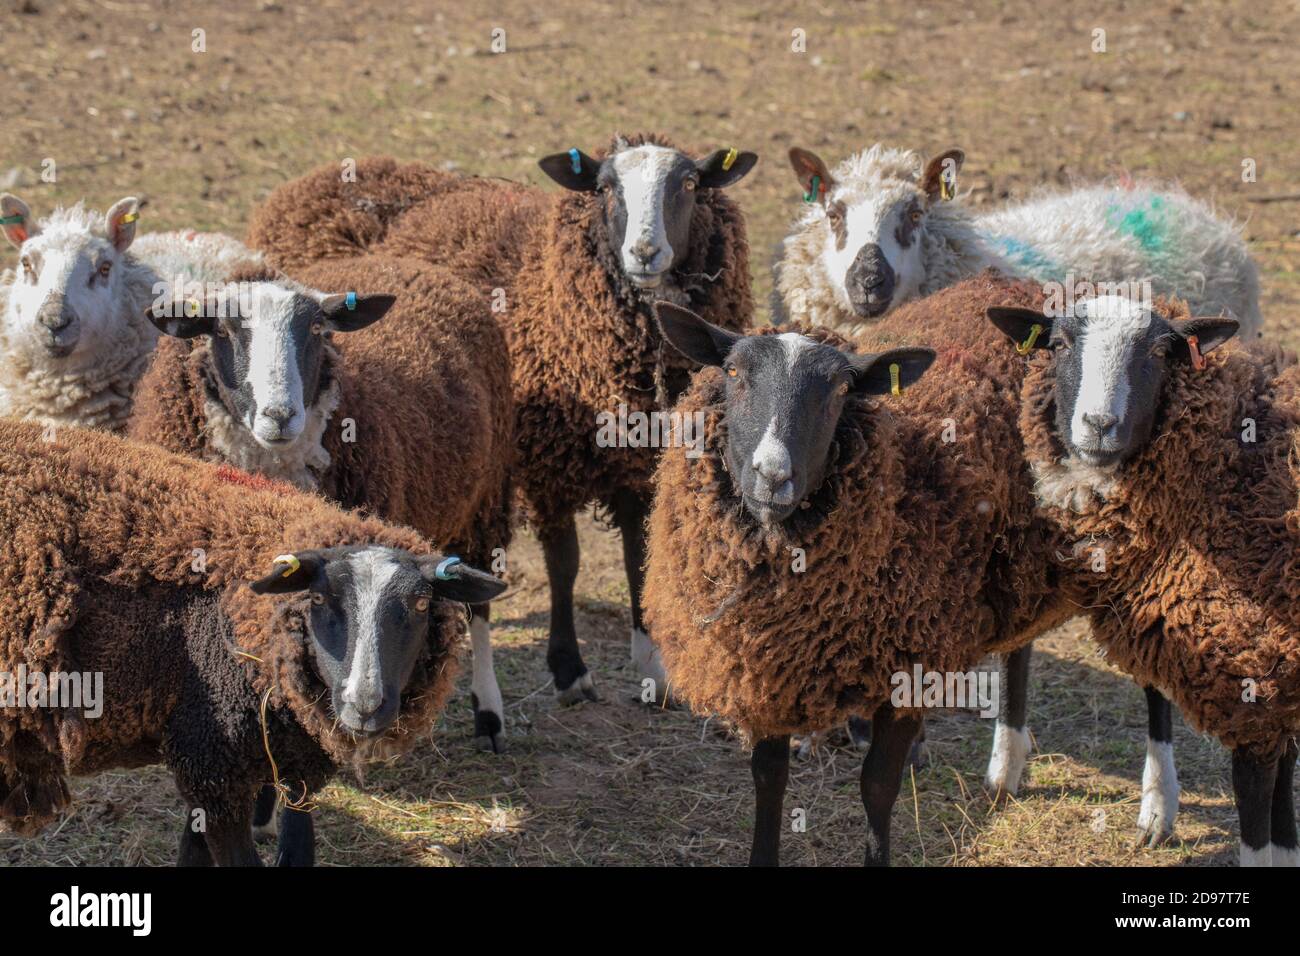 Sheep, cross bred, looking towards onlooker, waiting to be fed. Black and white striped marked faces. Stock Photo